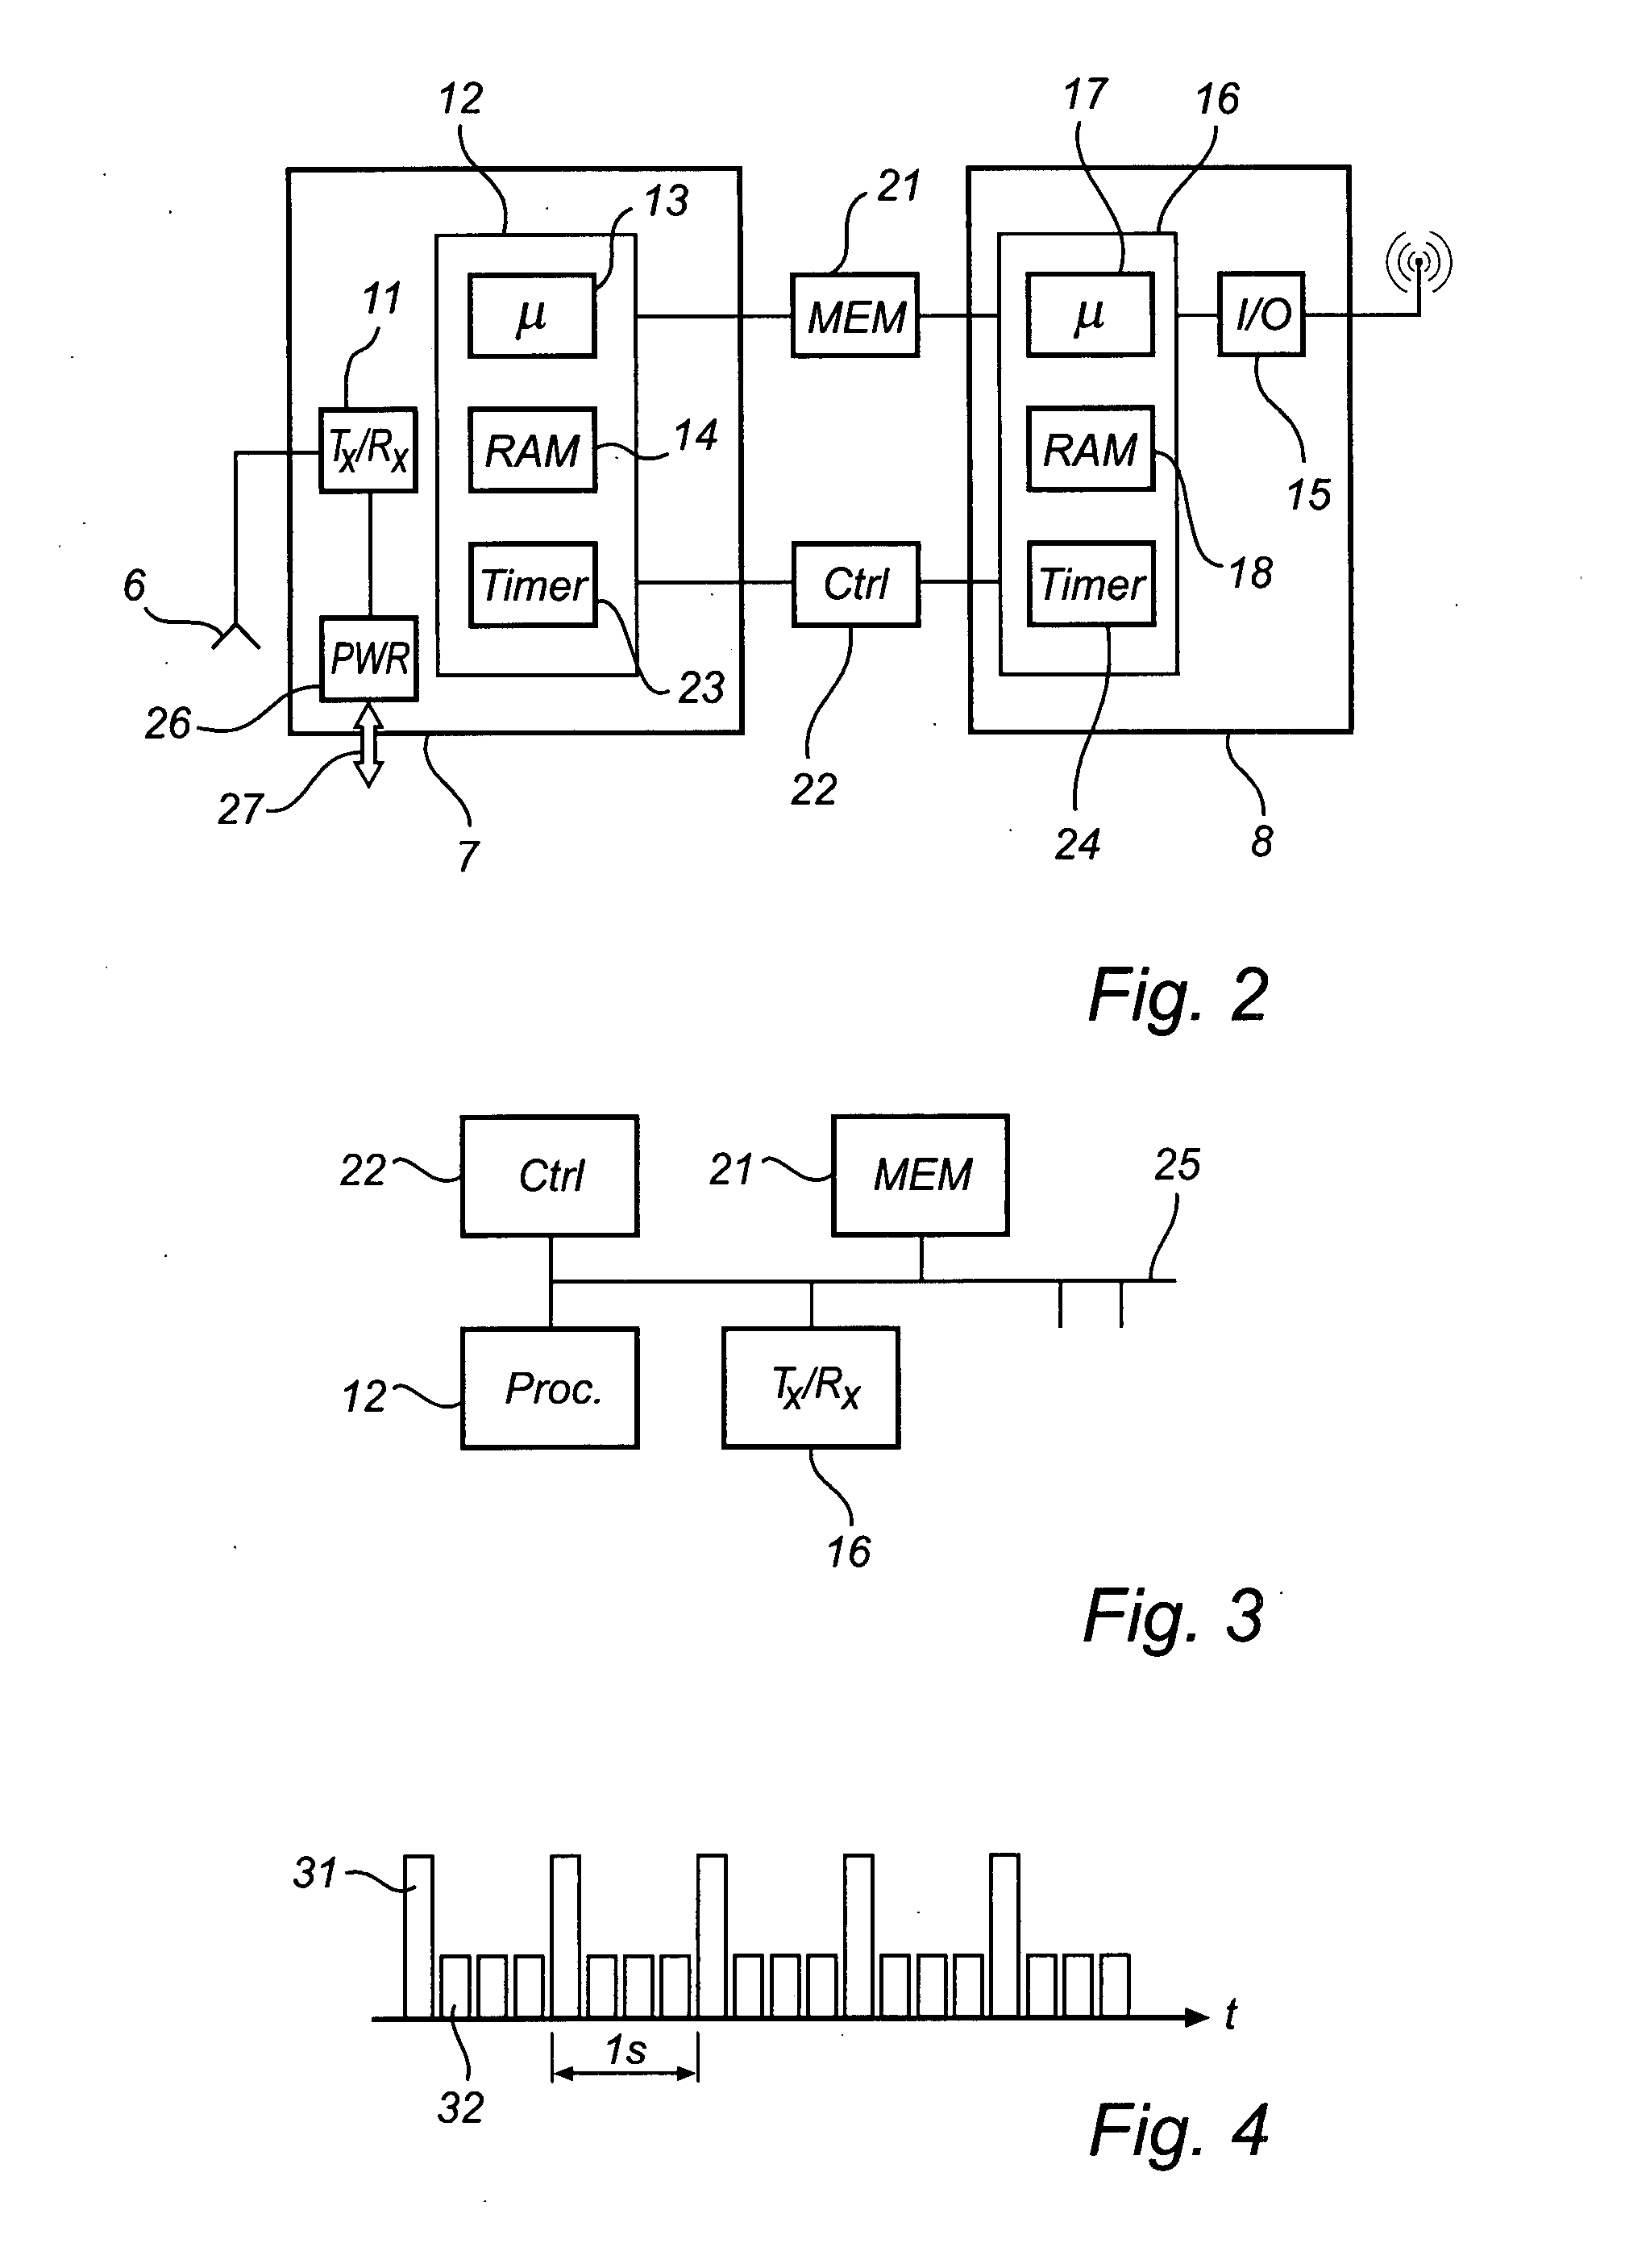 Process measurement instrument adapted for wireless communication